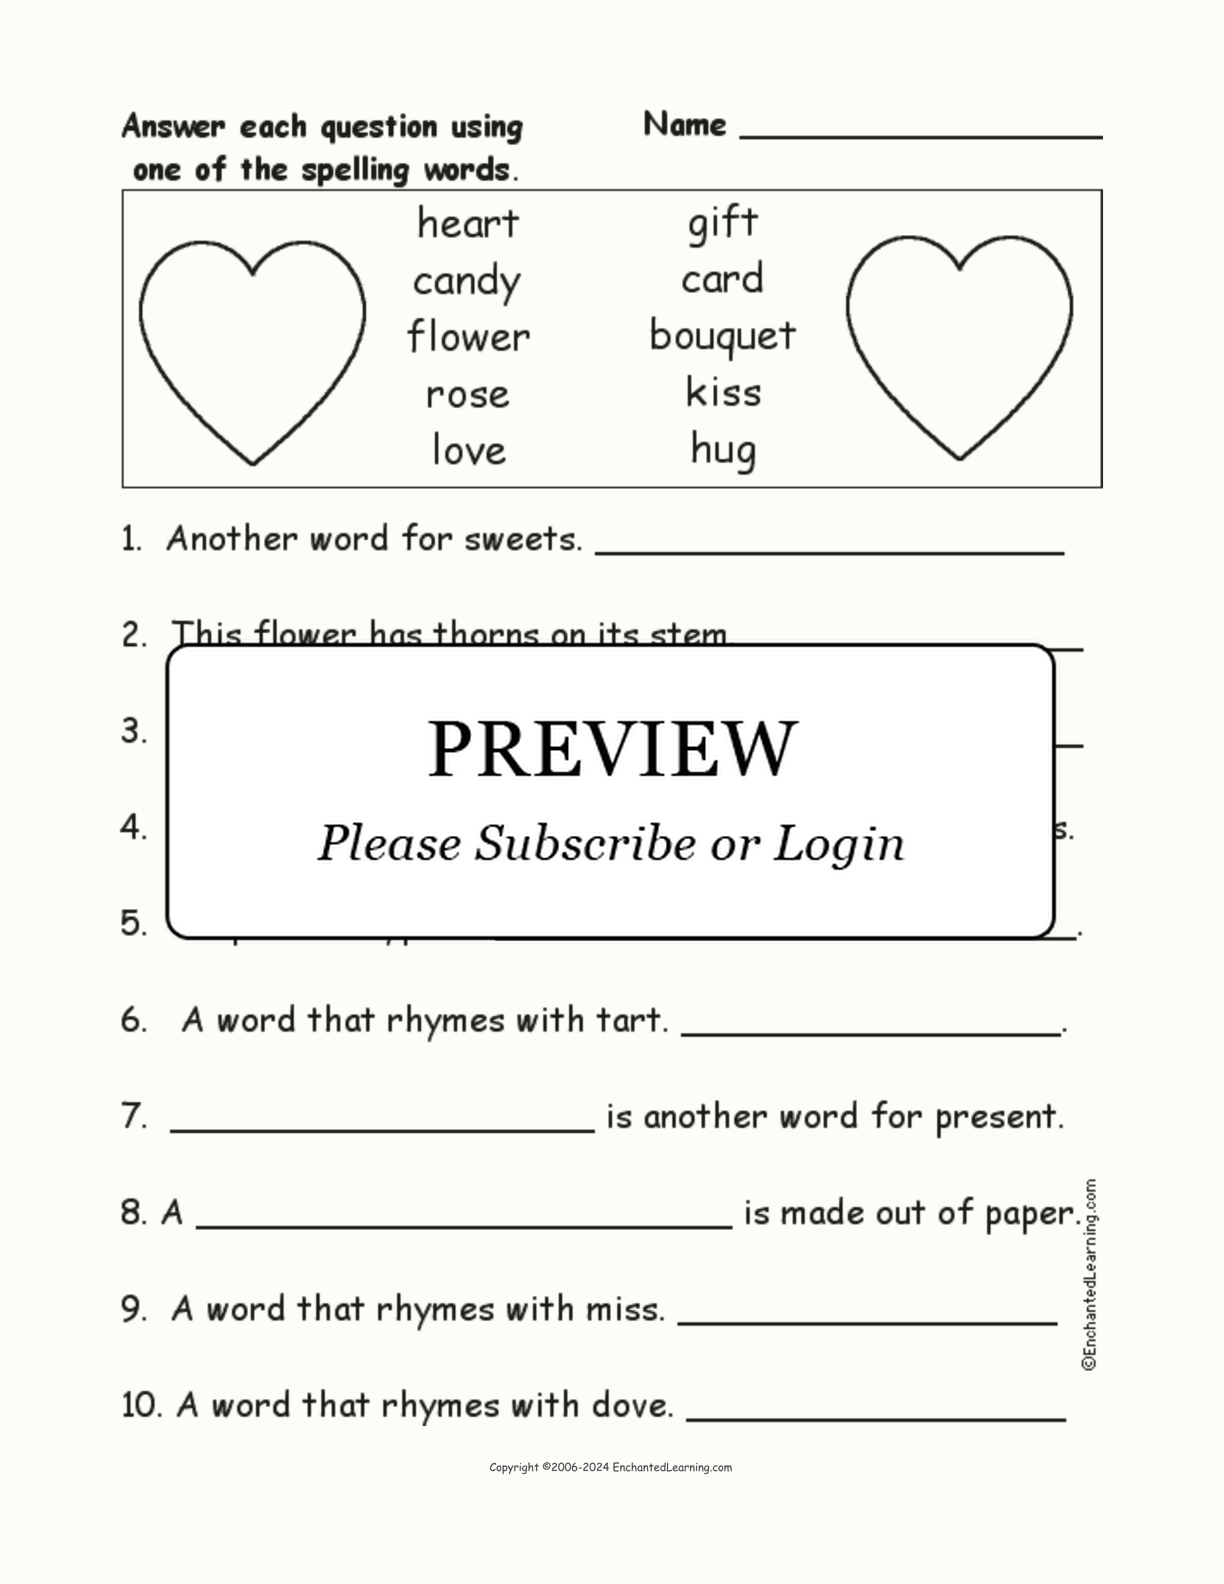 Valentine's Day Spelling Word Questions interactive worksheet page 1